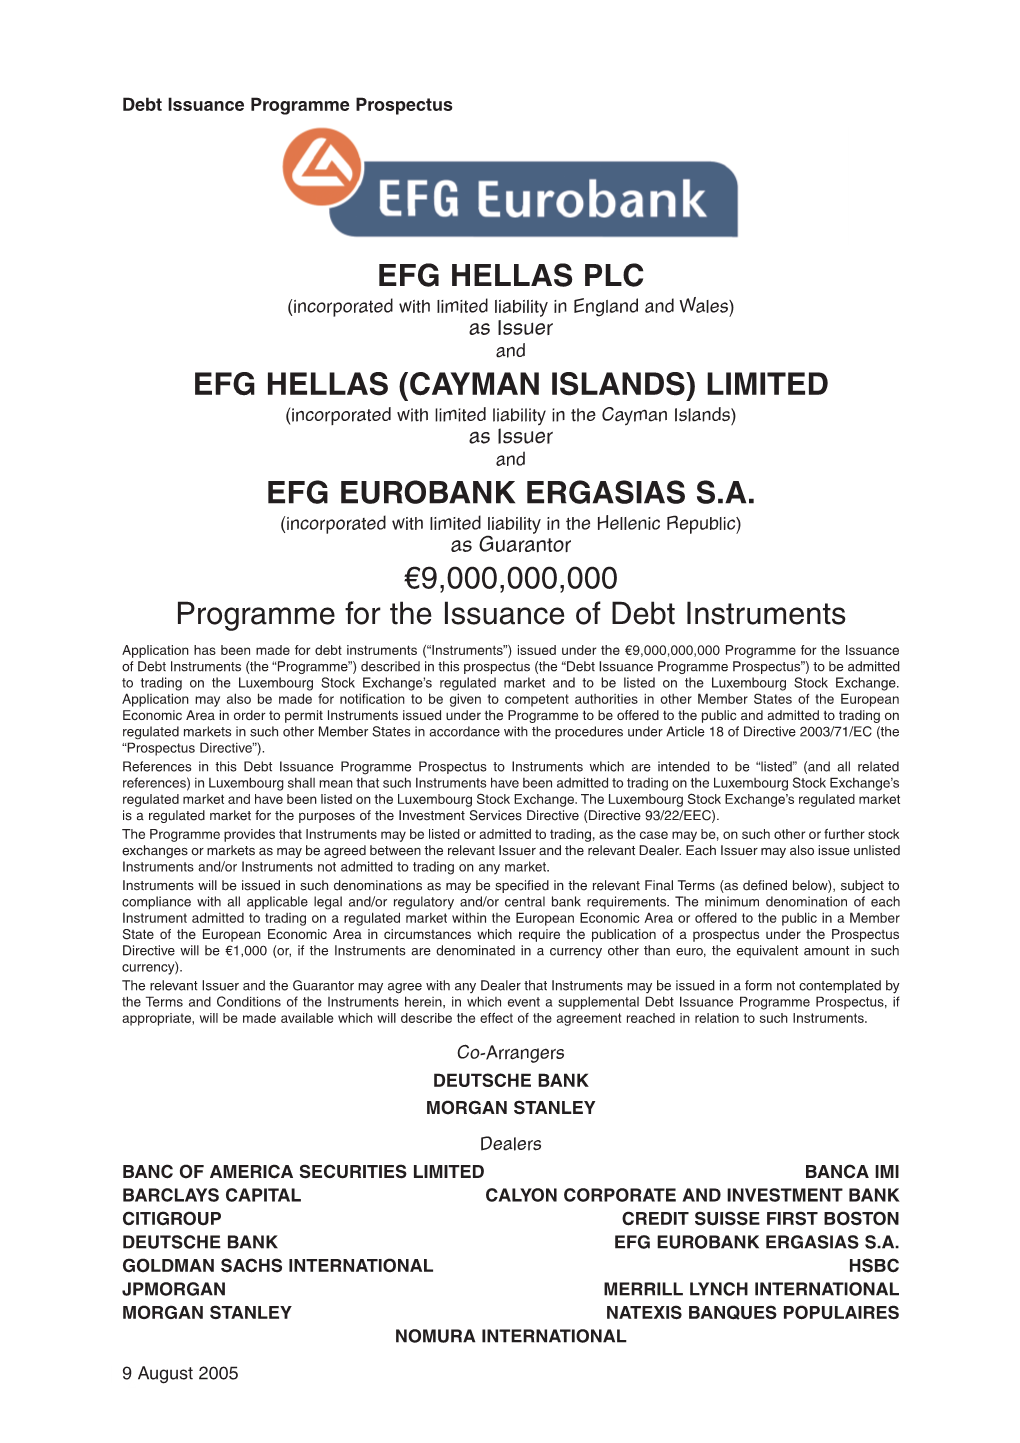 CAYMAN ISLANDS) LIMITED (Incorporated with Limited Liability in the Cayman Islands) As Issuer and EFG EUROBANK ERGASIAS S.A